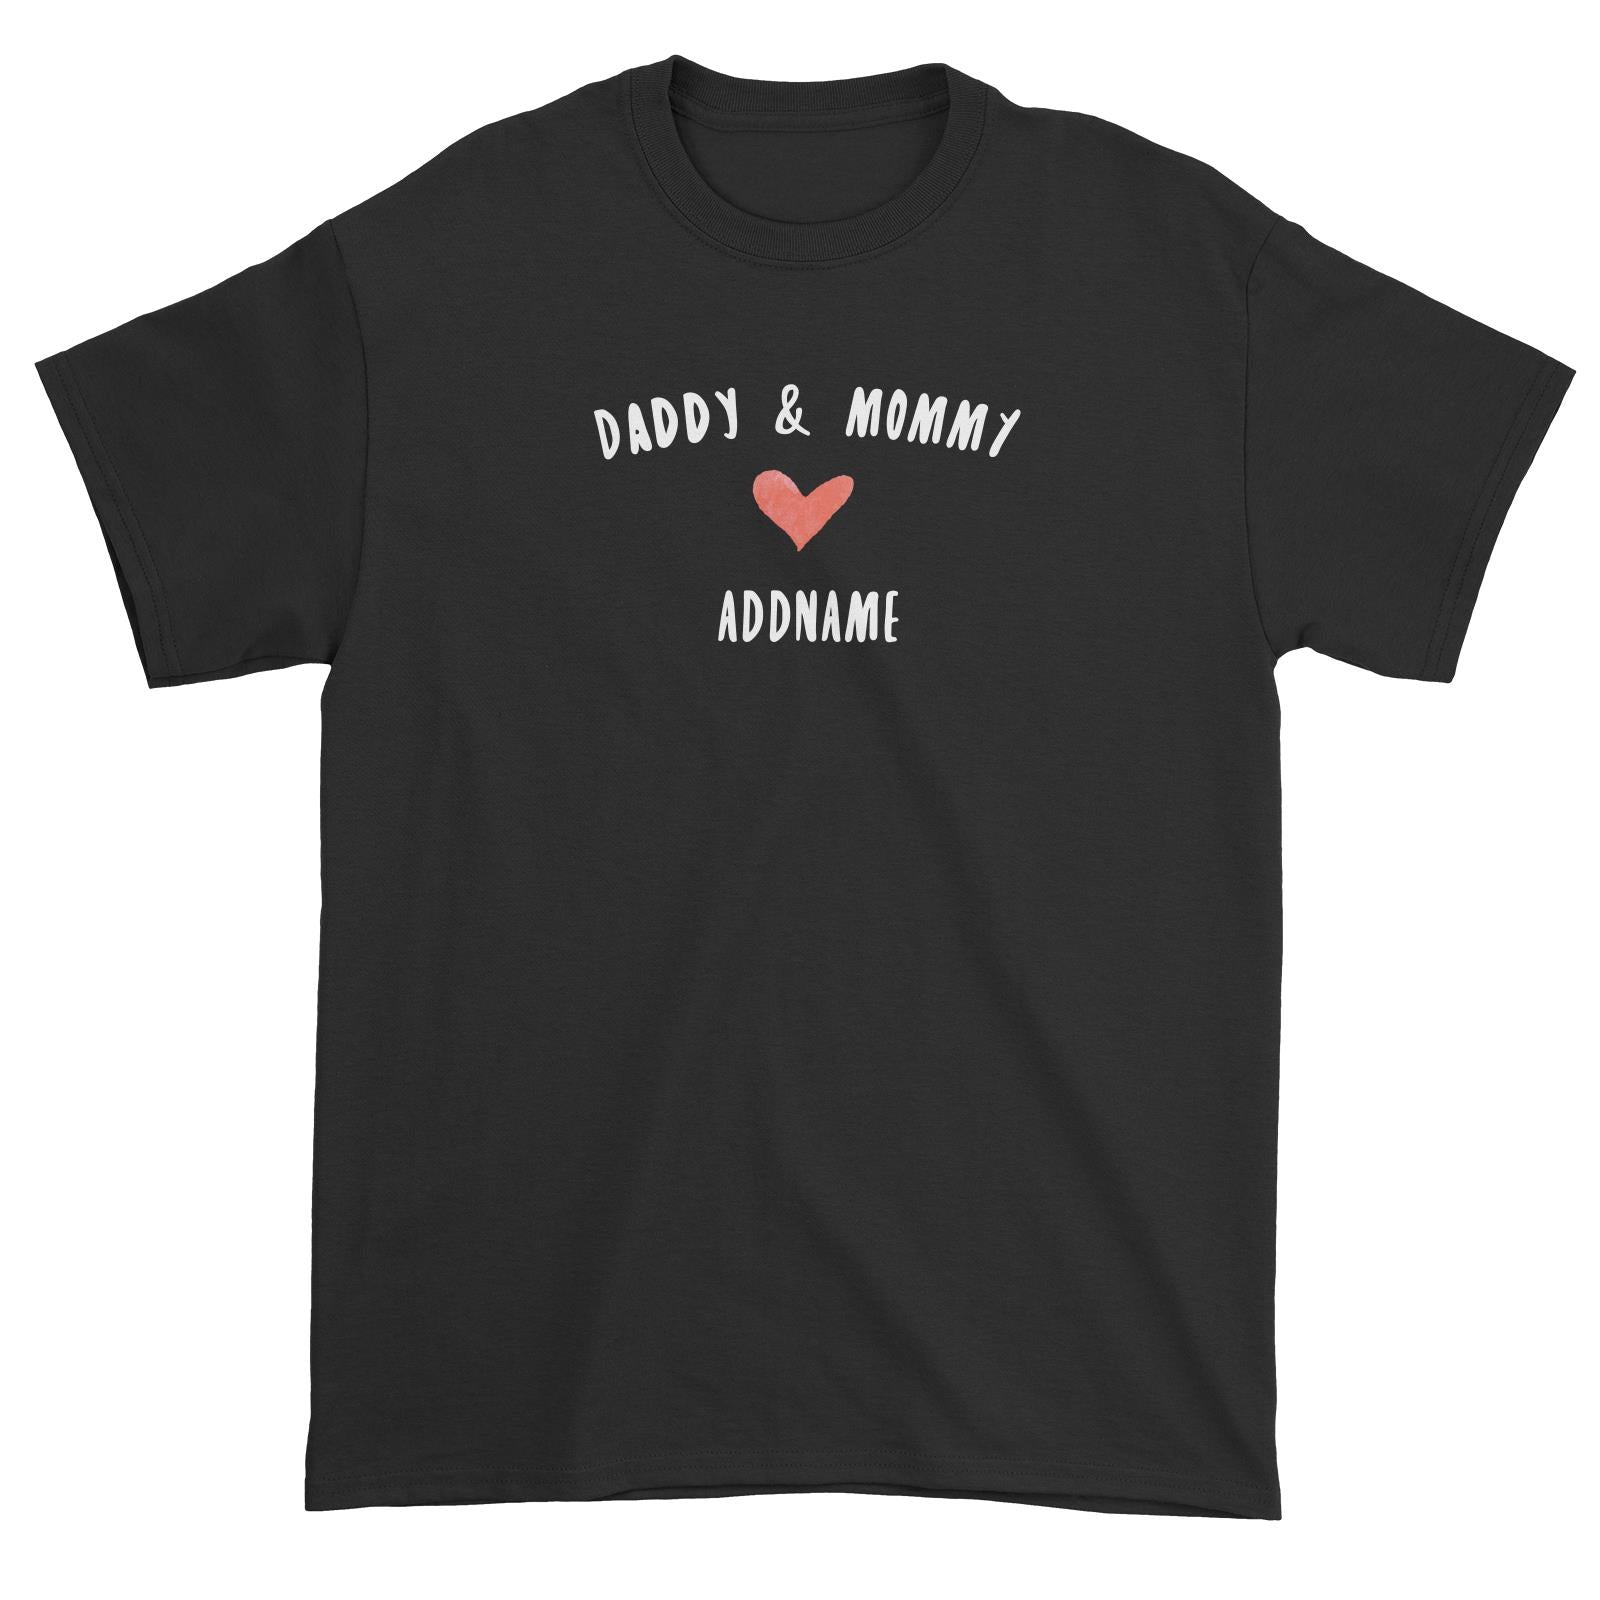 Daddy & Mommy Love Addname Unisex T-Shirt  Matching Family Personalizable Designs